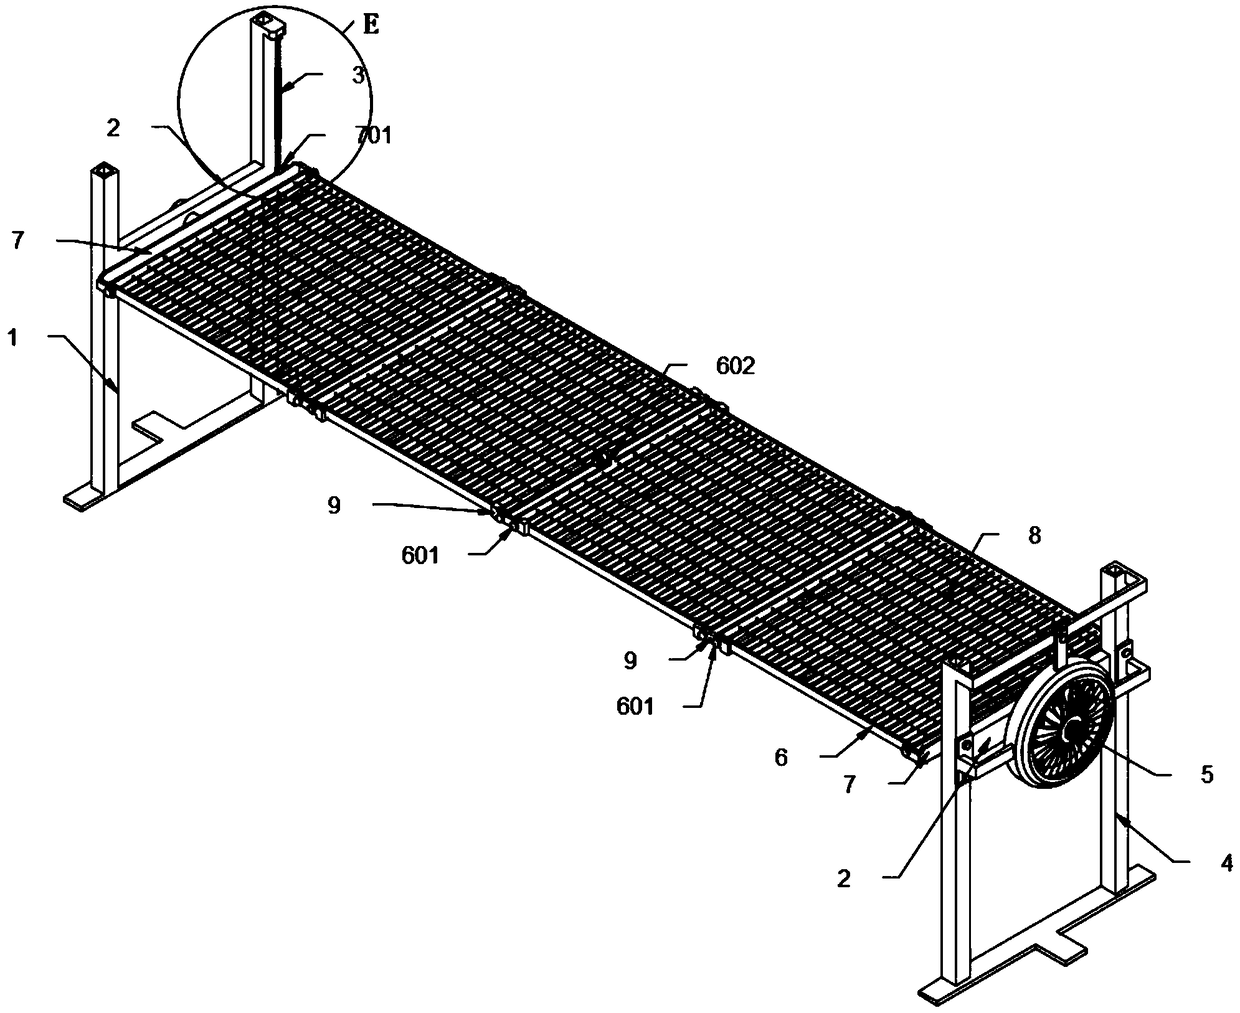 Crop sun-drying apparatus with adjustable irradiation angle